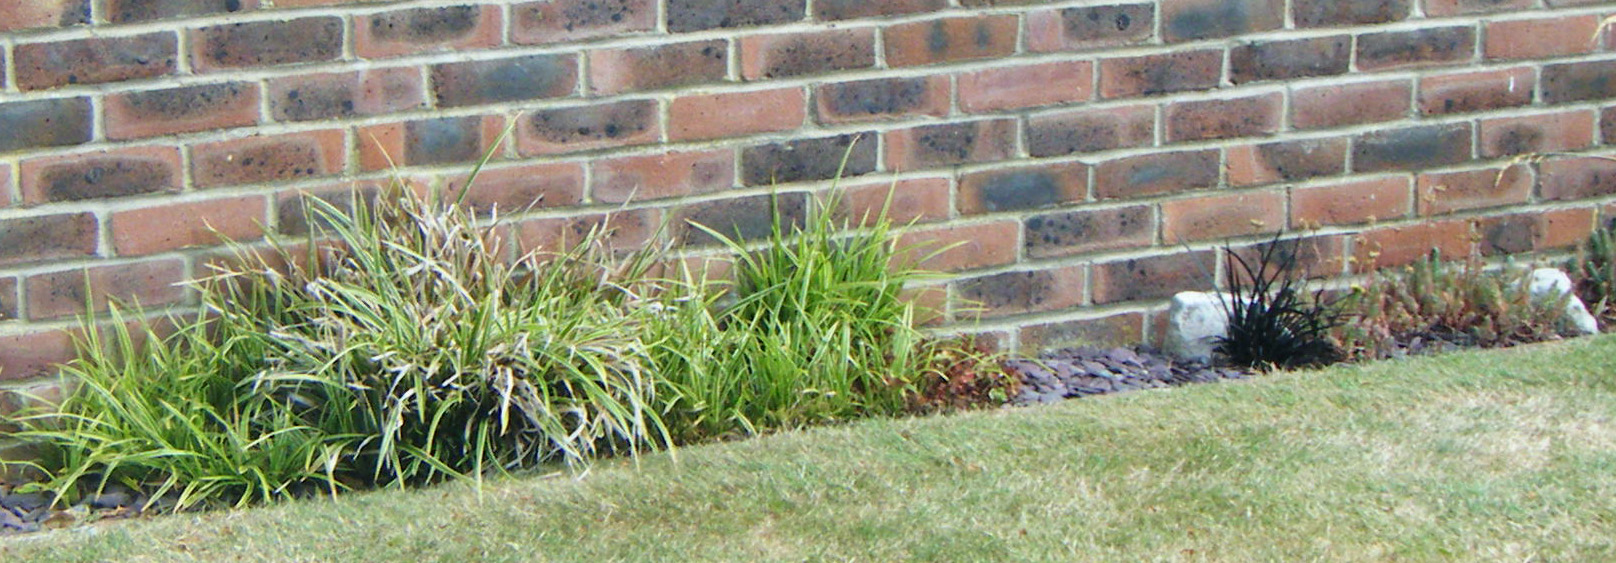 garden design rules, plant eye level down not feet up. Image shows tiny plants beside a tall wall